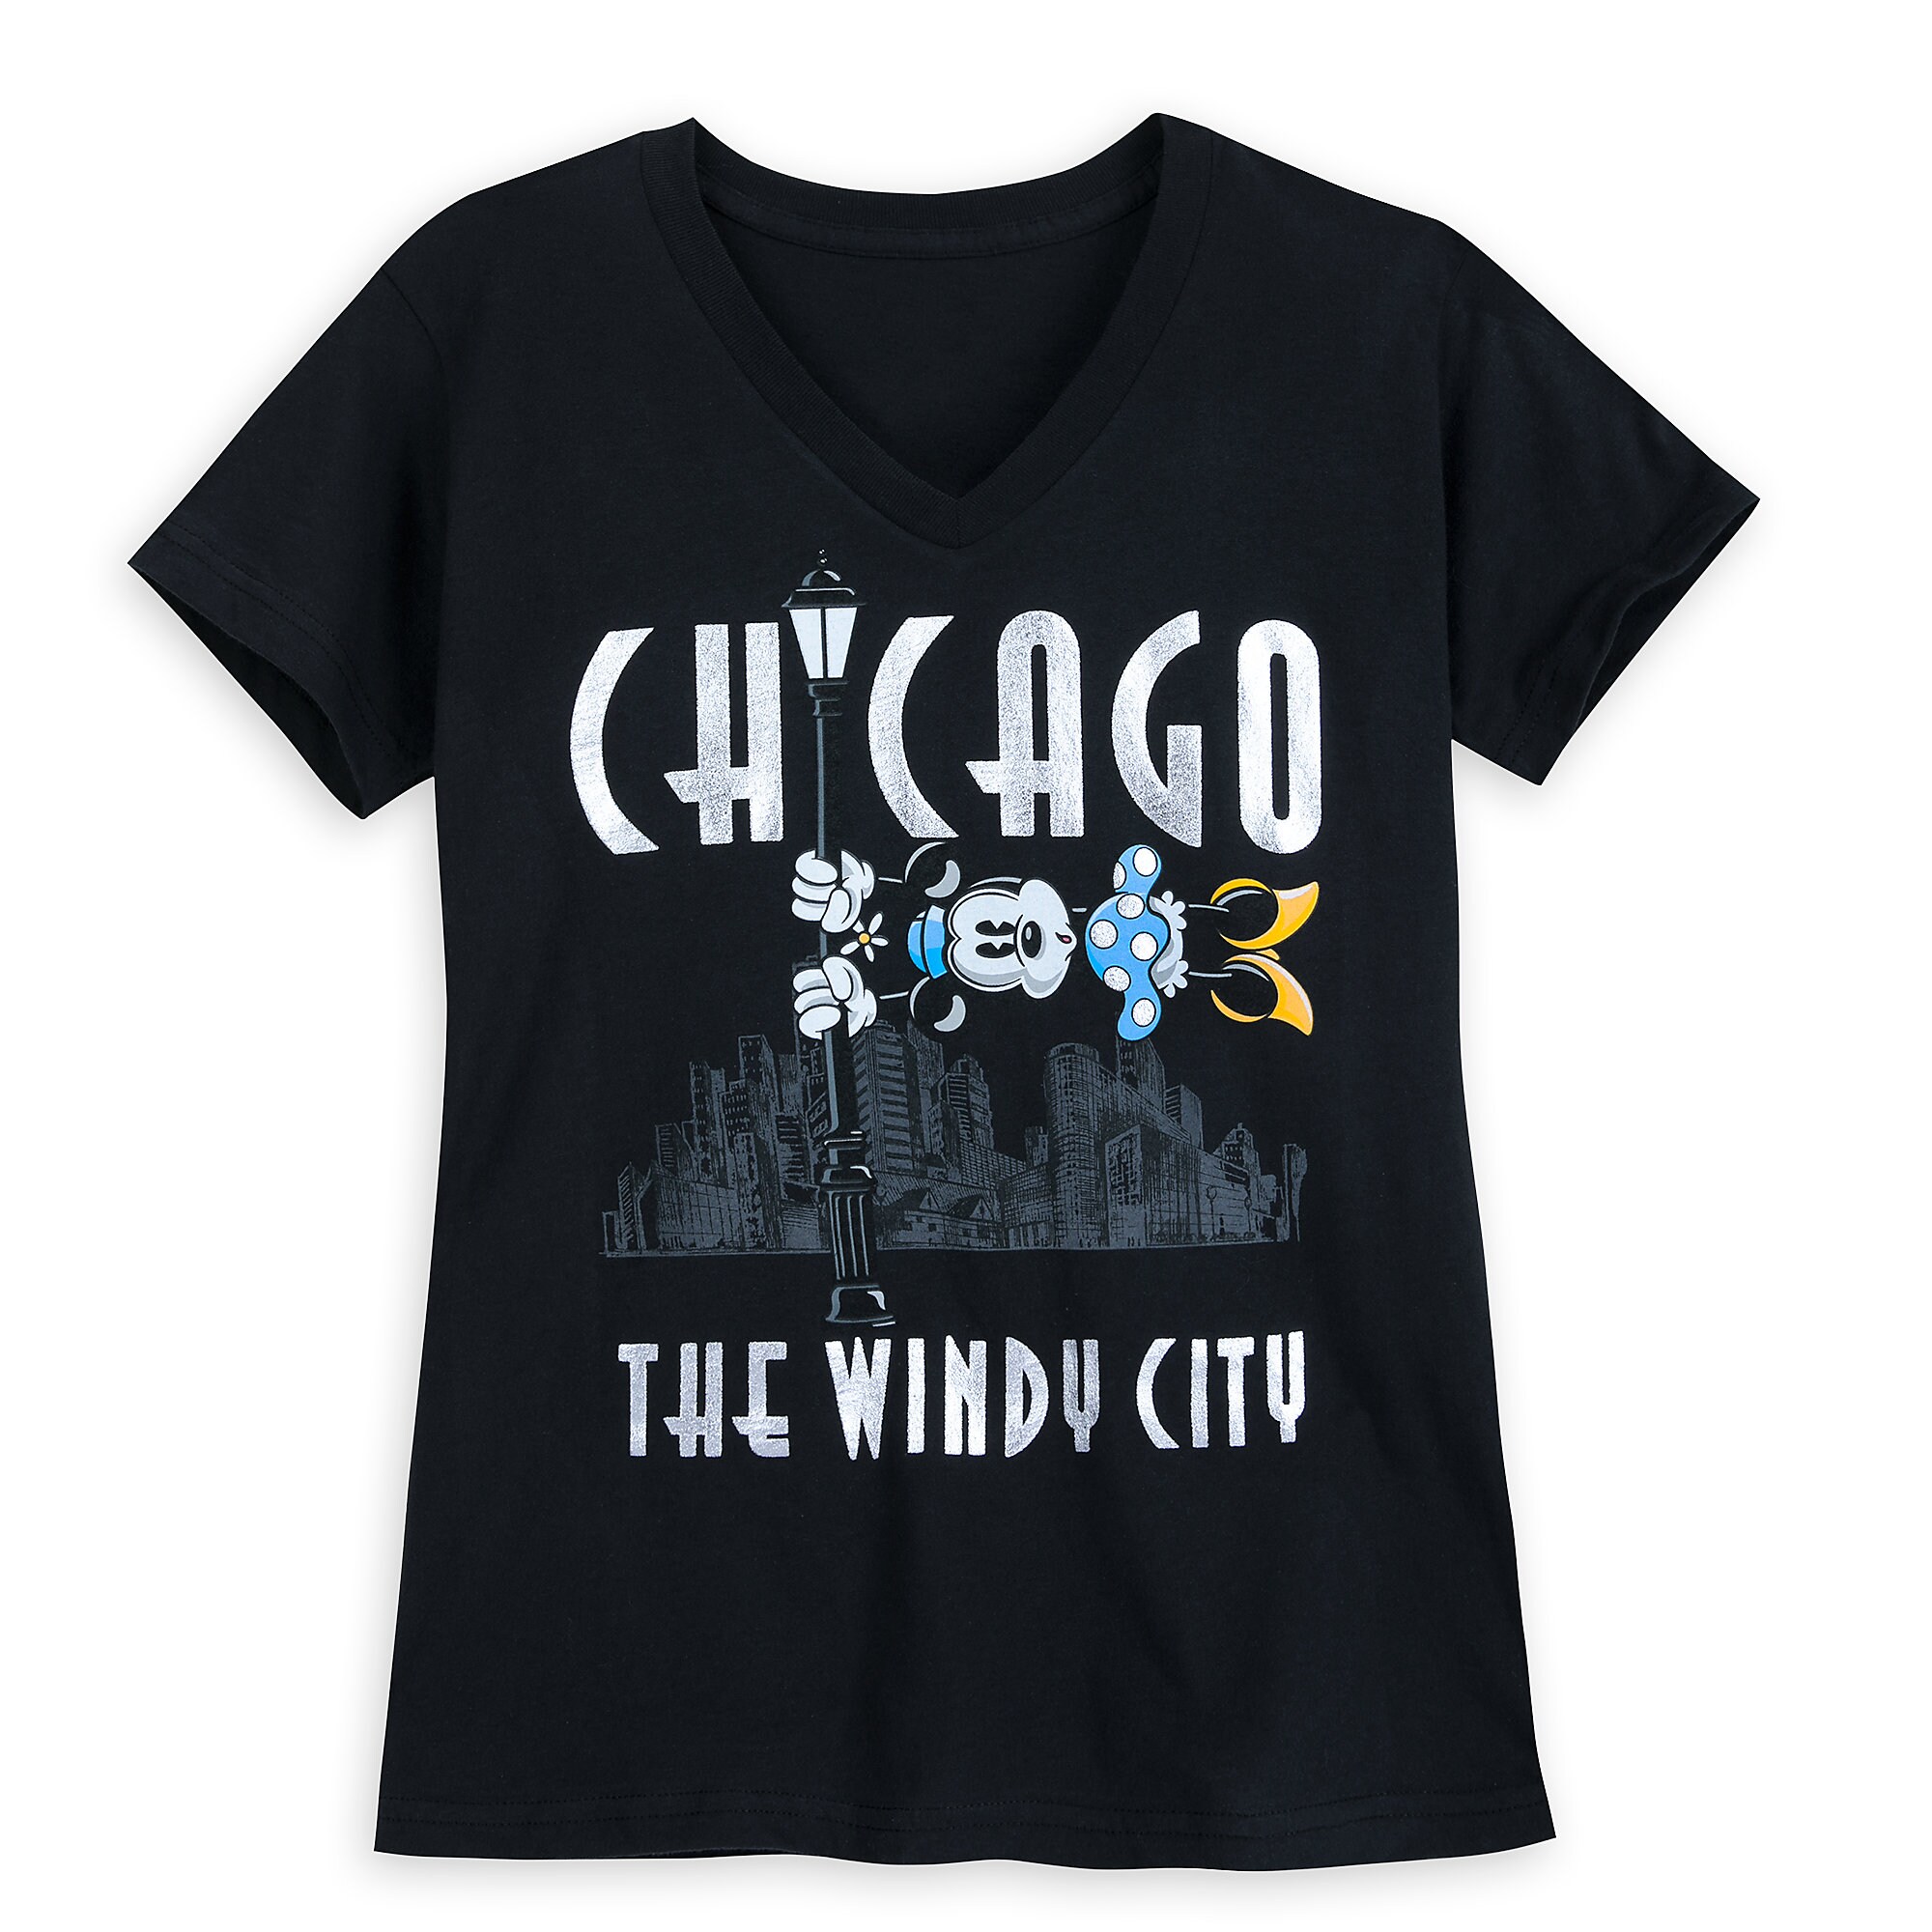 Minnie Mouse Chicago T-Shirt for Women